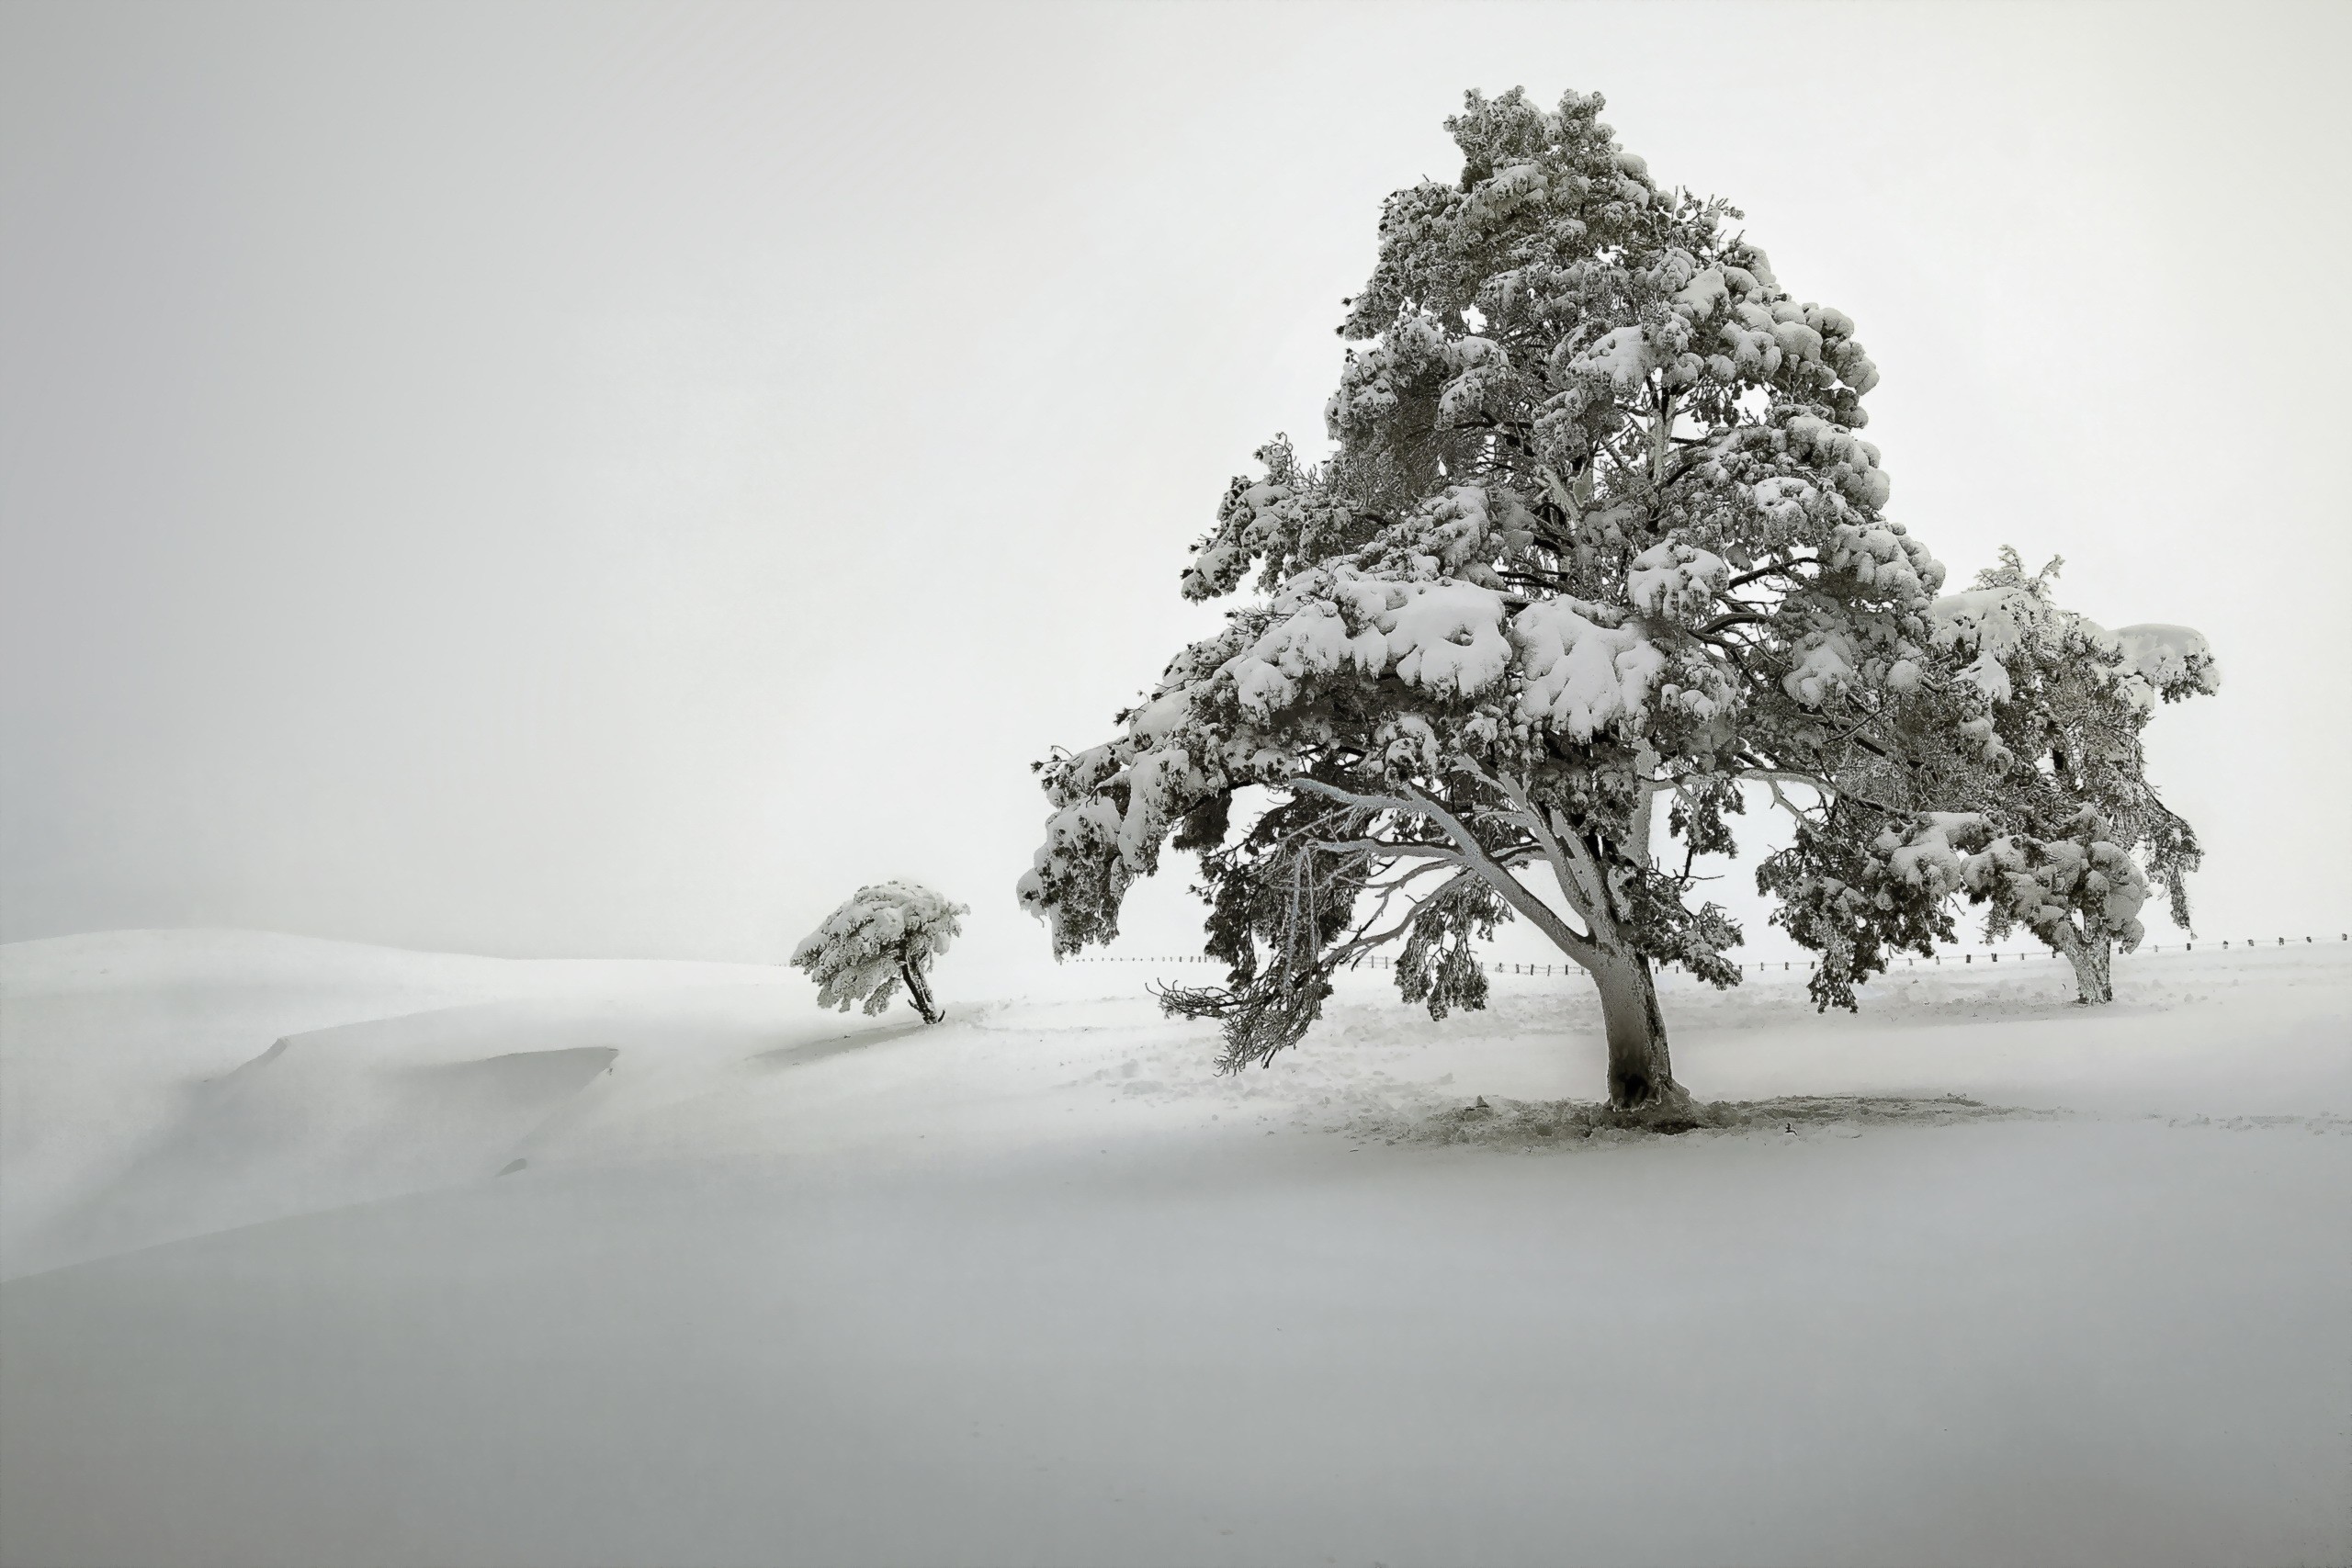 General 2560x1707 trees snow winter landscape nature white minimalism cold outdoors